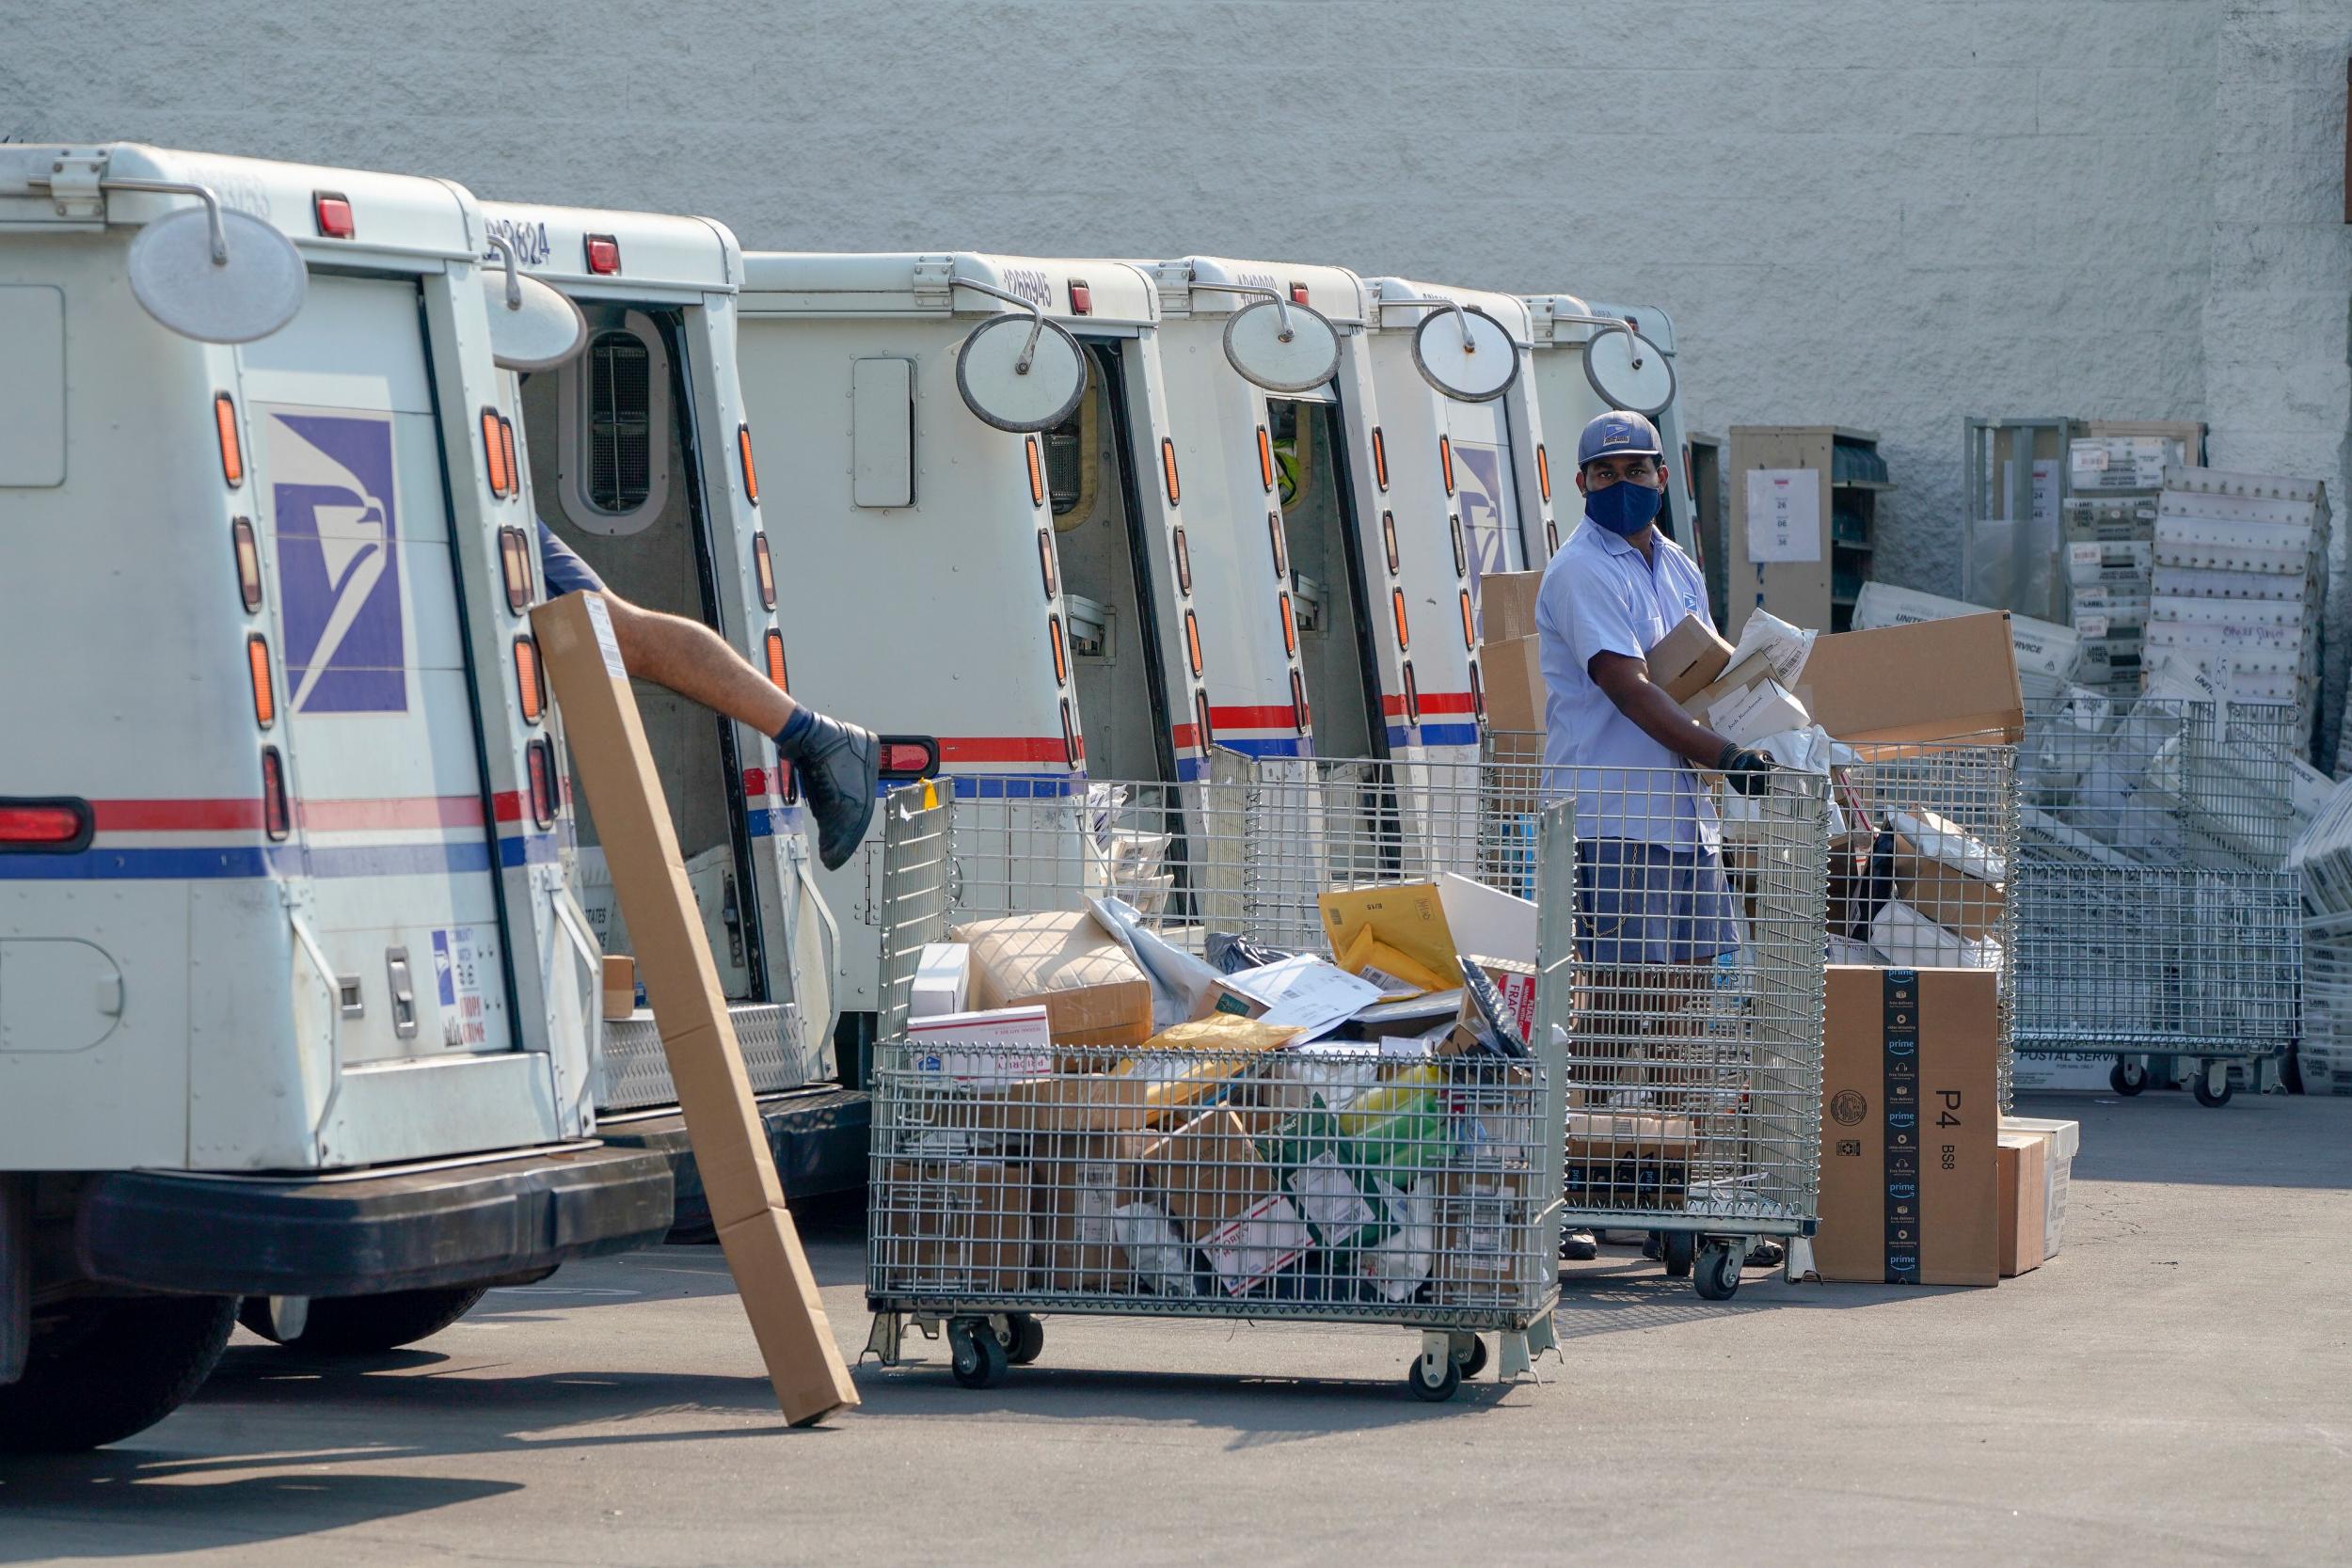 US House agrees $25bn for Postal Service amid Trump attacks – but Republicans likely to block